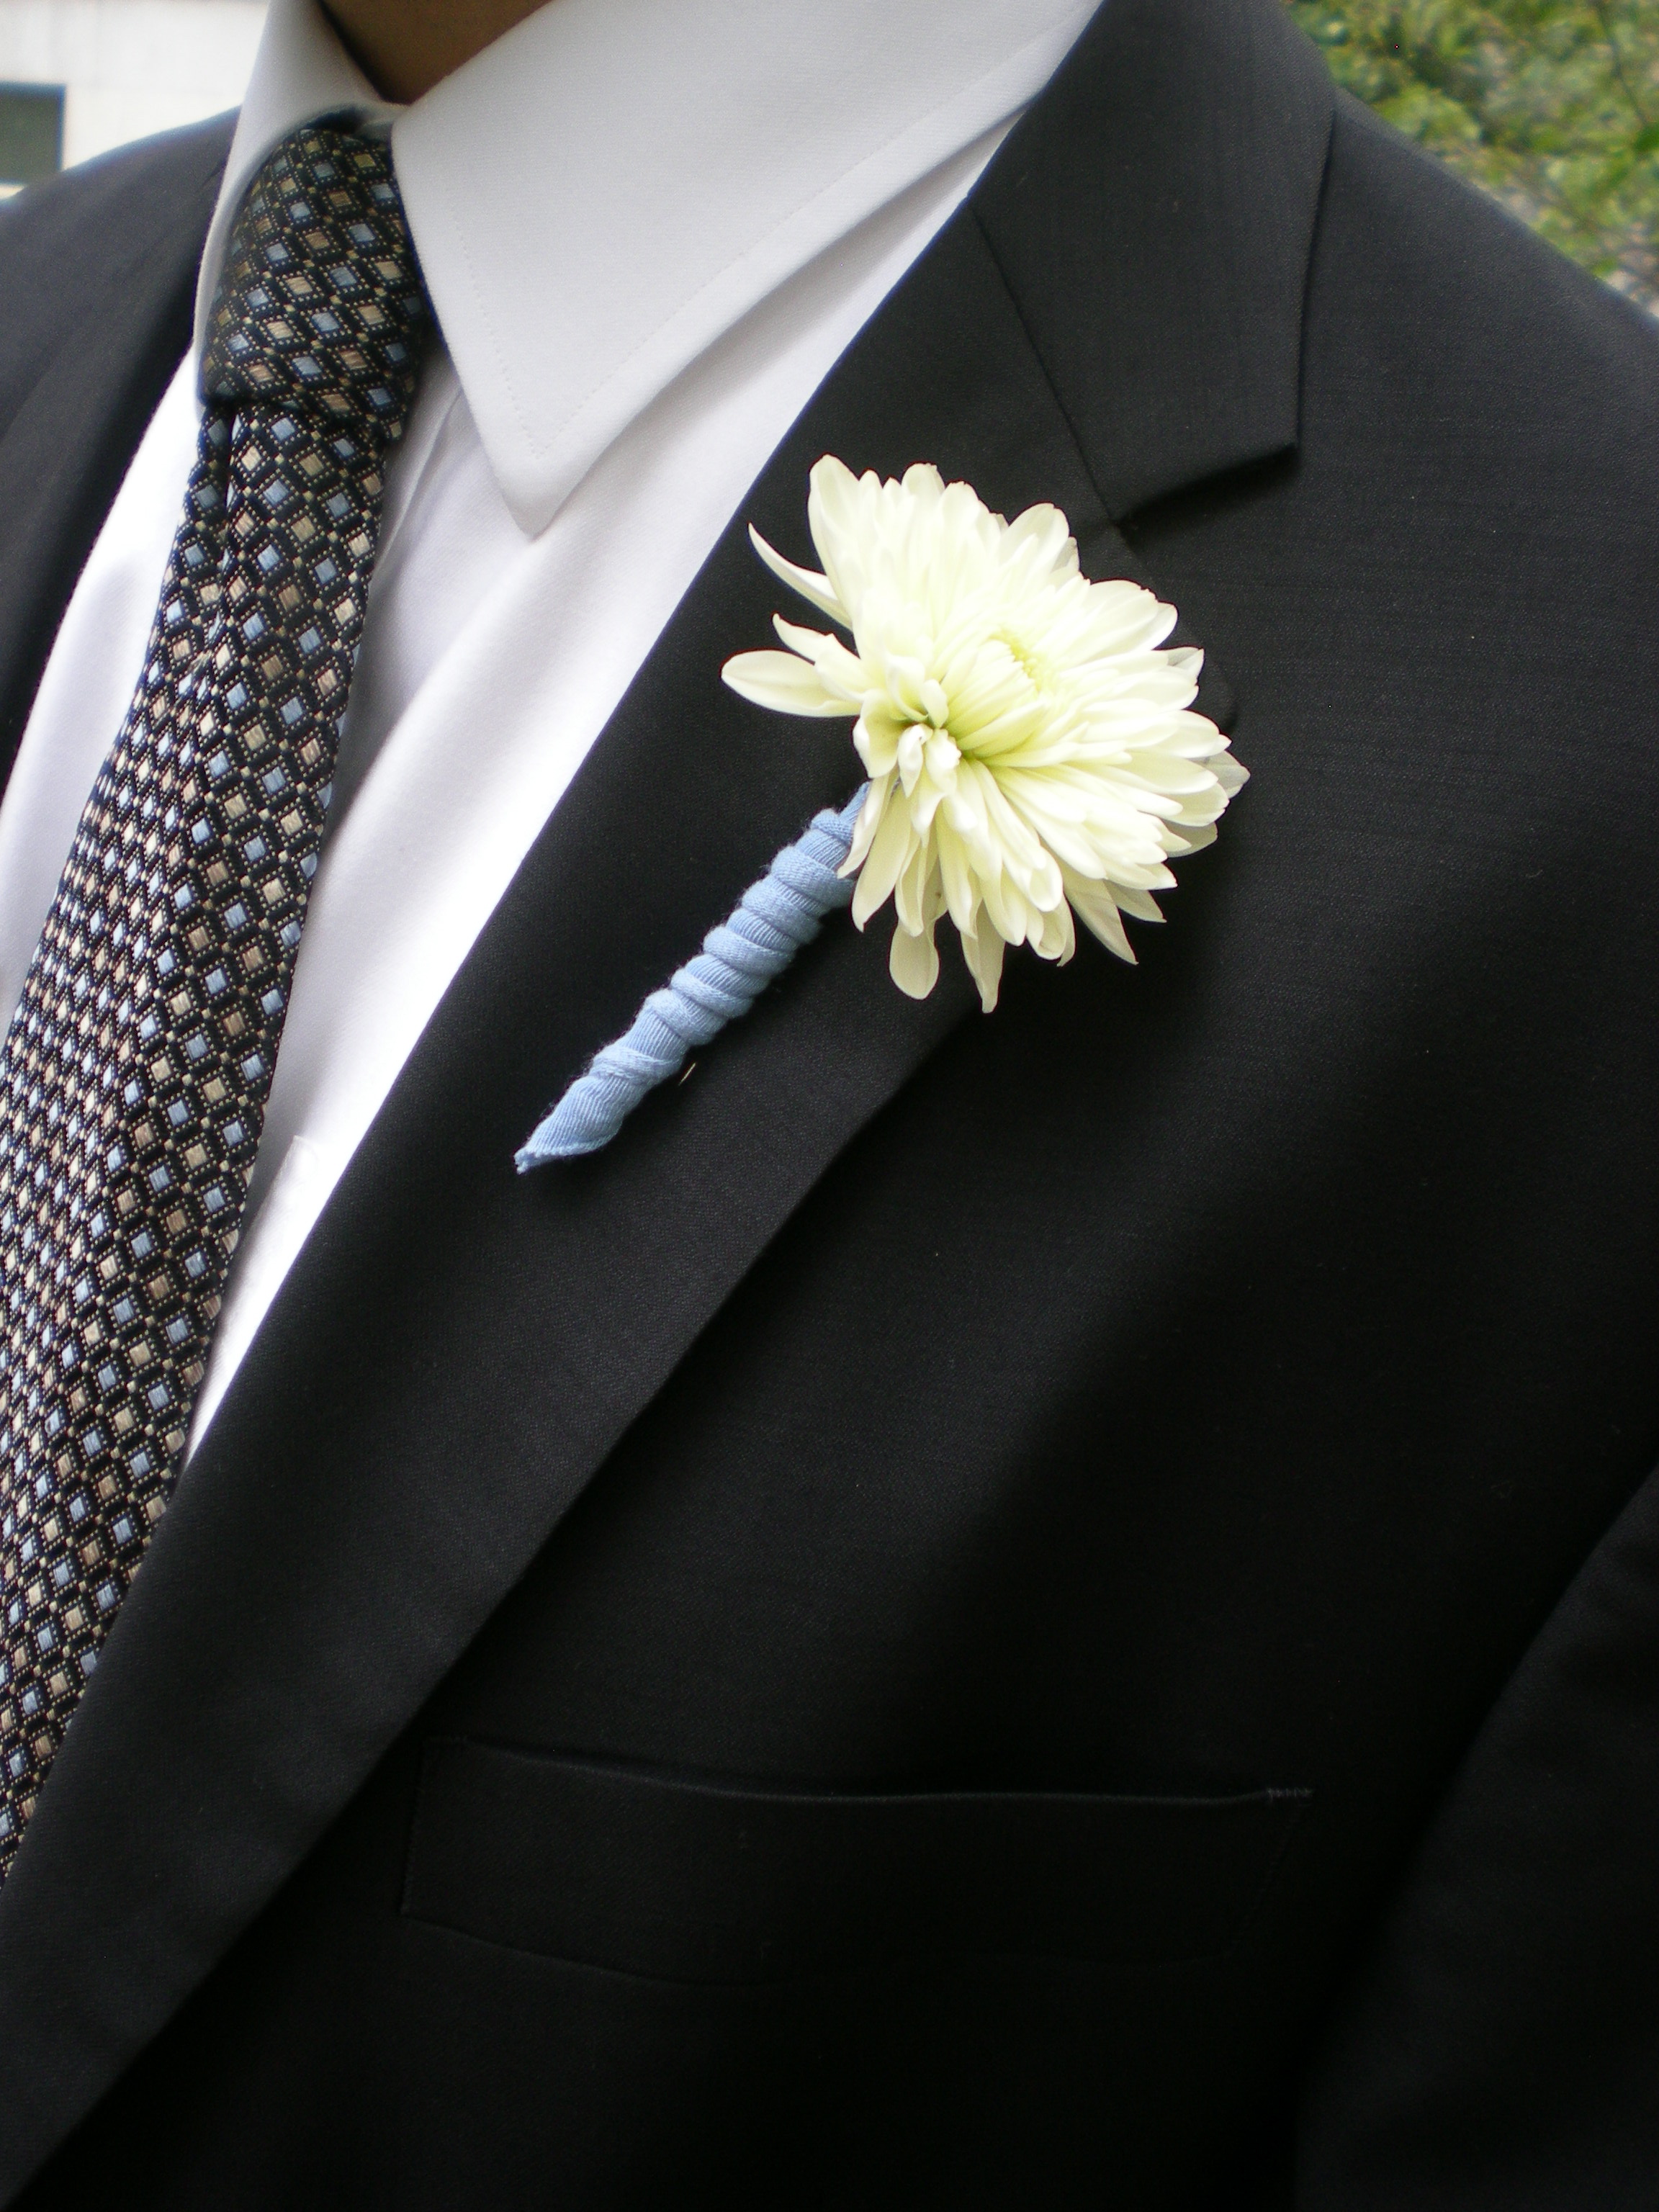 Boutonniere Definition of Boutonniere by Merriam-Webster